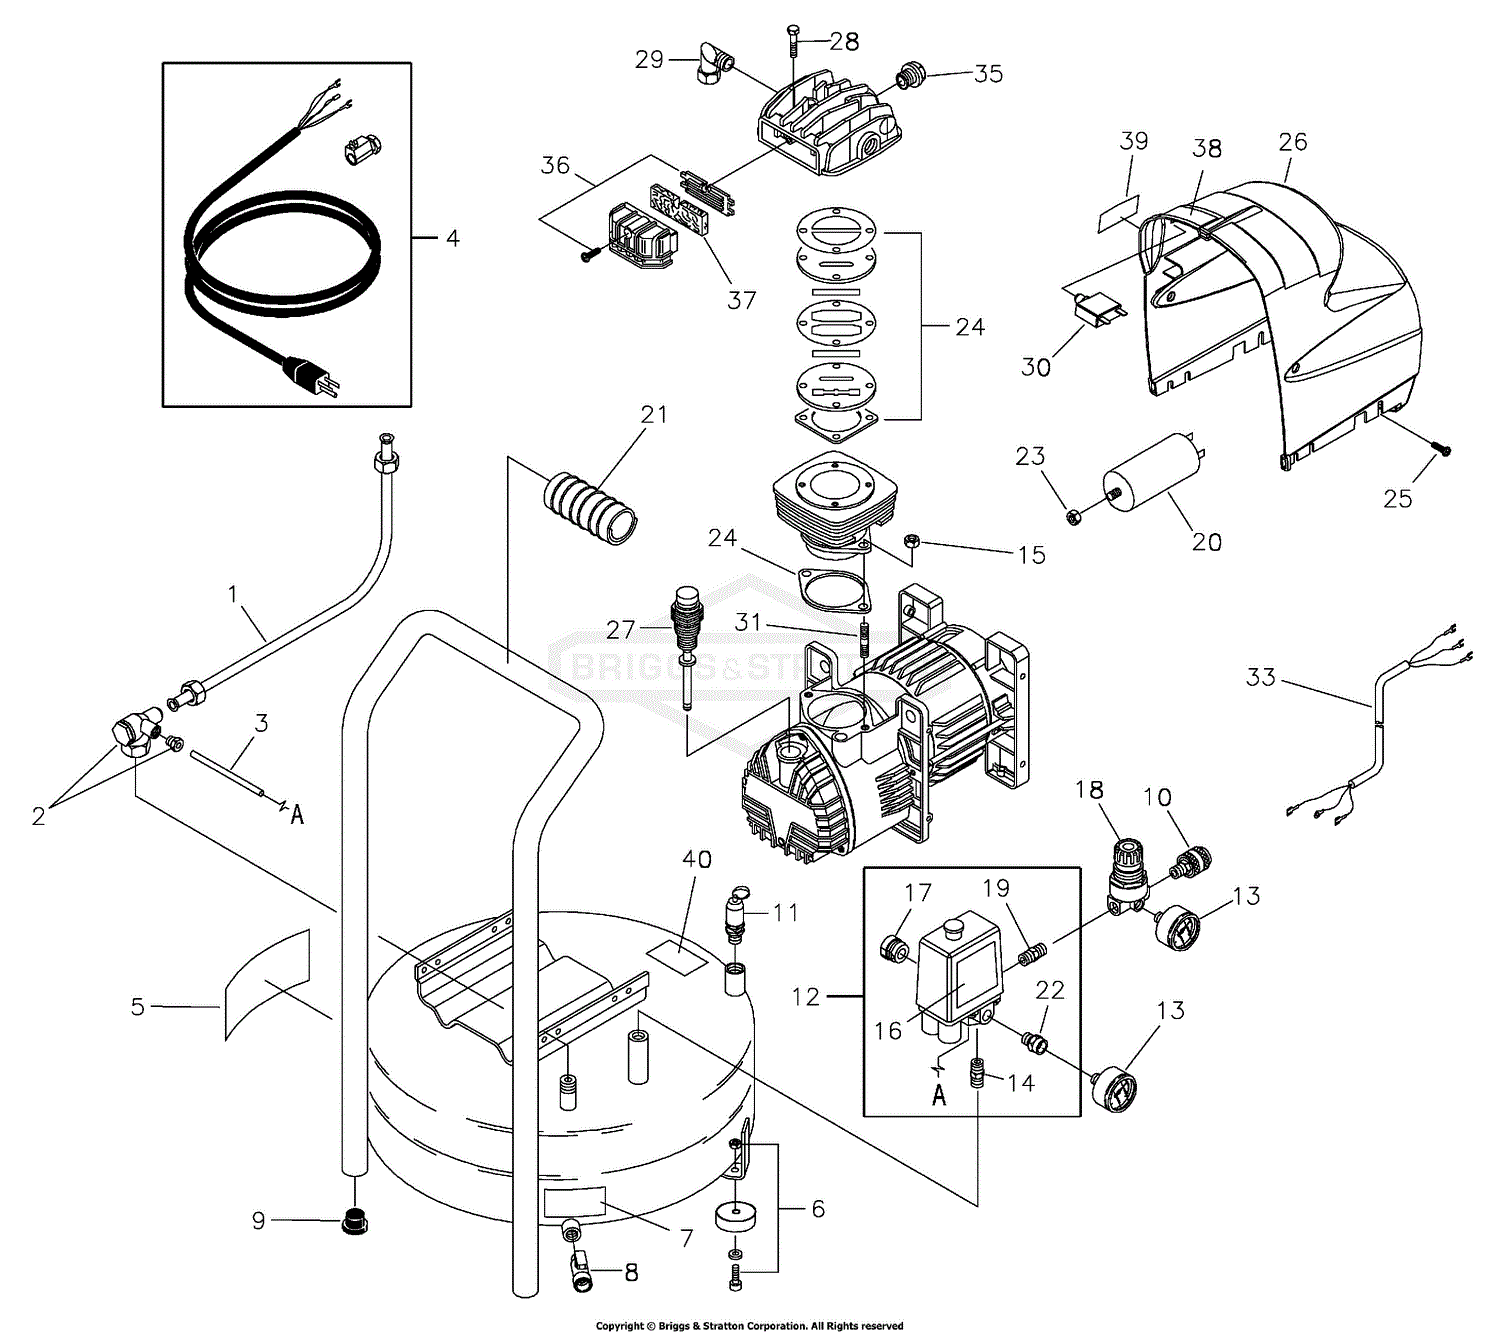 Briggs And Stratton Power Products 074008 0 4 9 Cfm 6 Gal Parts Diagram For Air Compressor